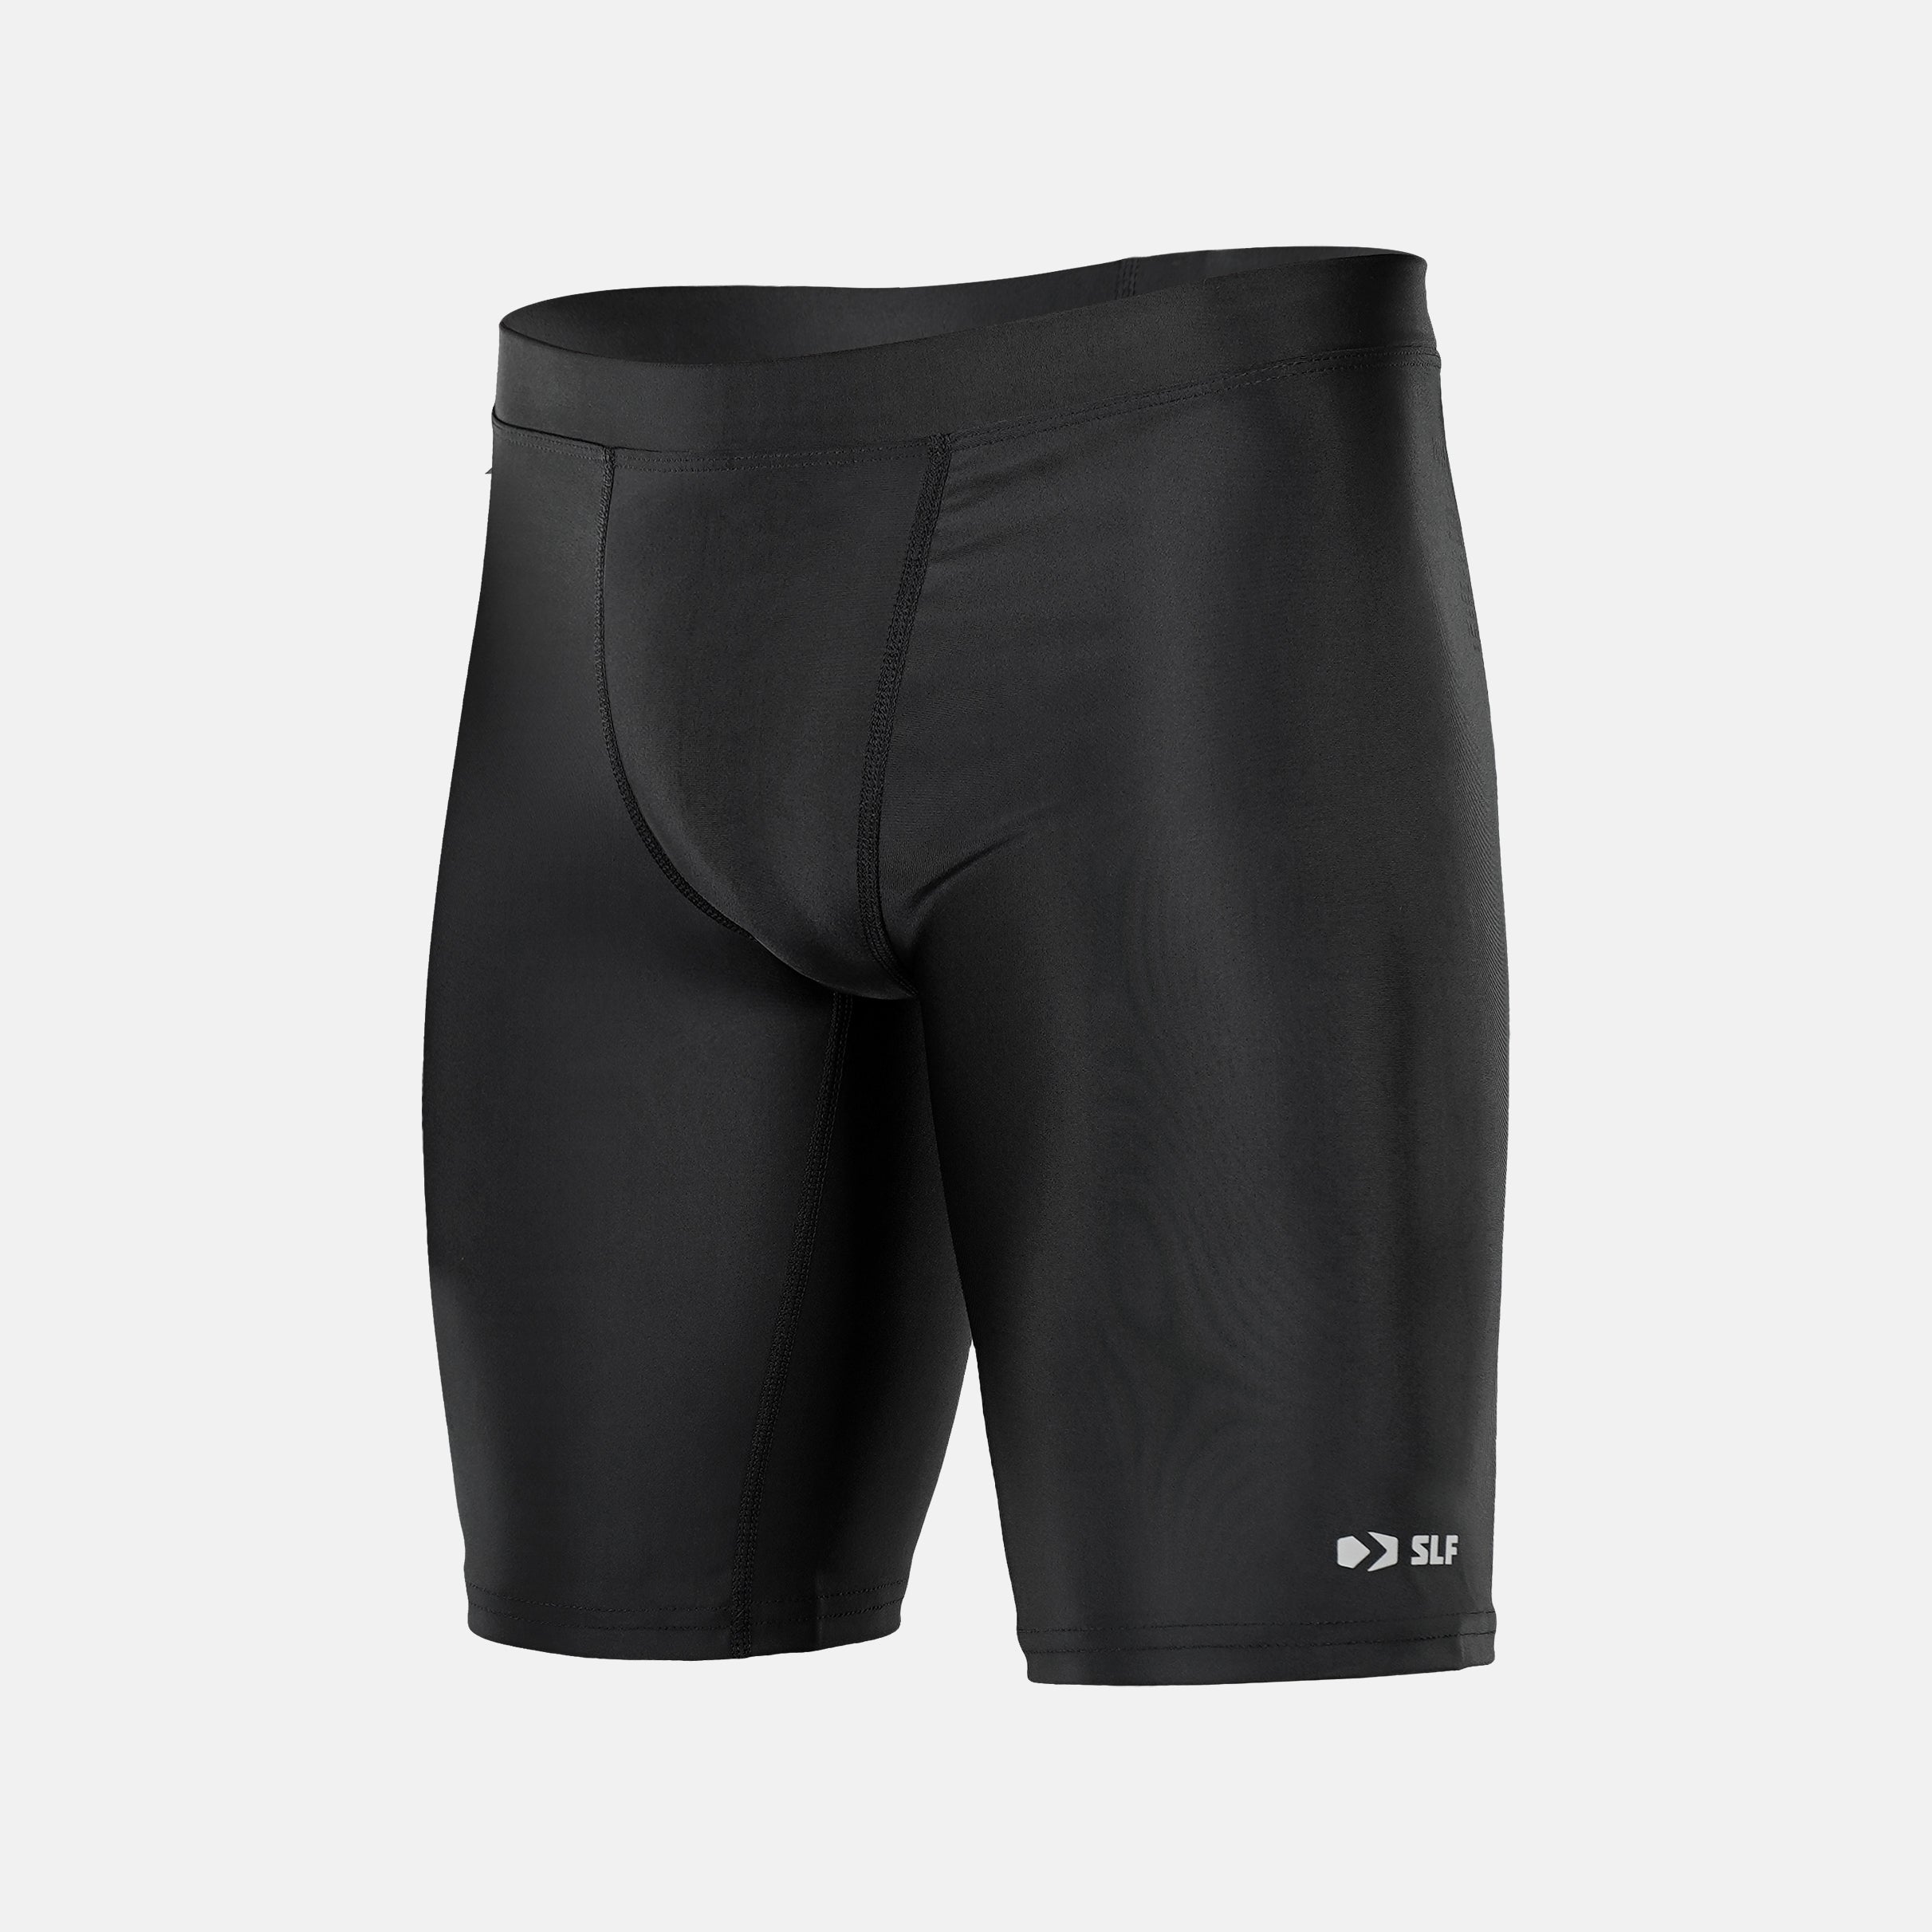 Can Compression Shorts Improve Workout Performance?